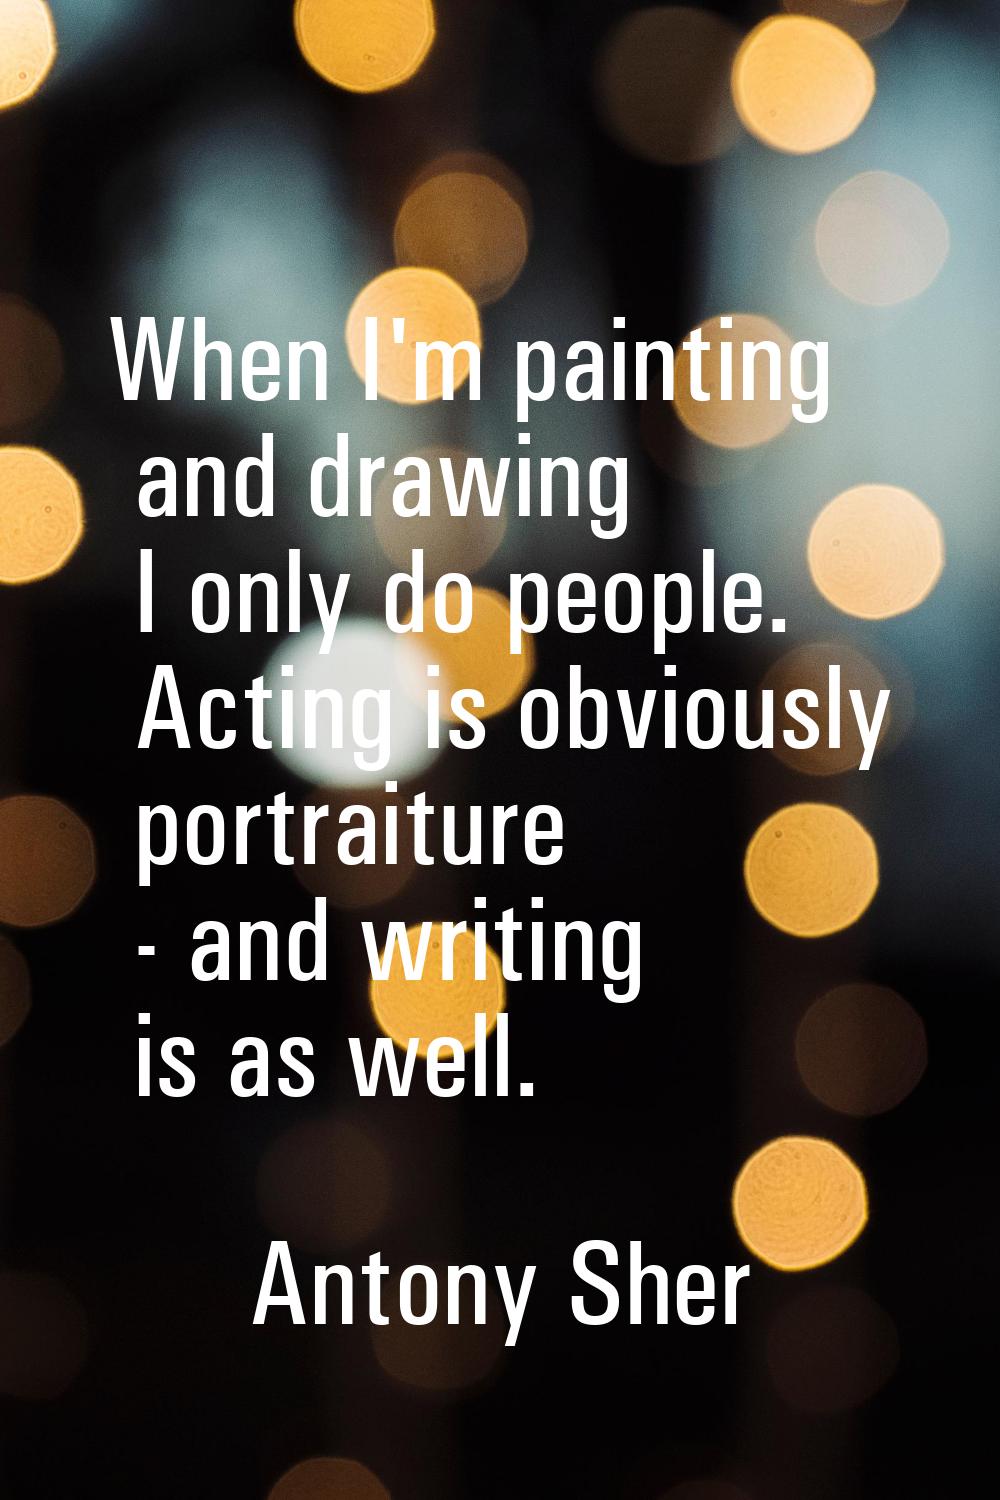 When I'm painting and drawing I only do people. Acting is obviously portraiture - and writing is as